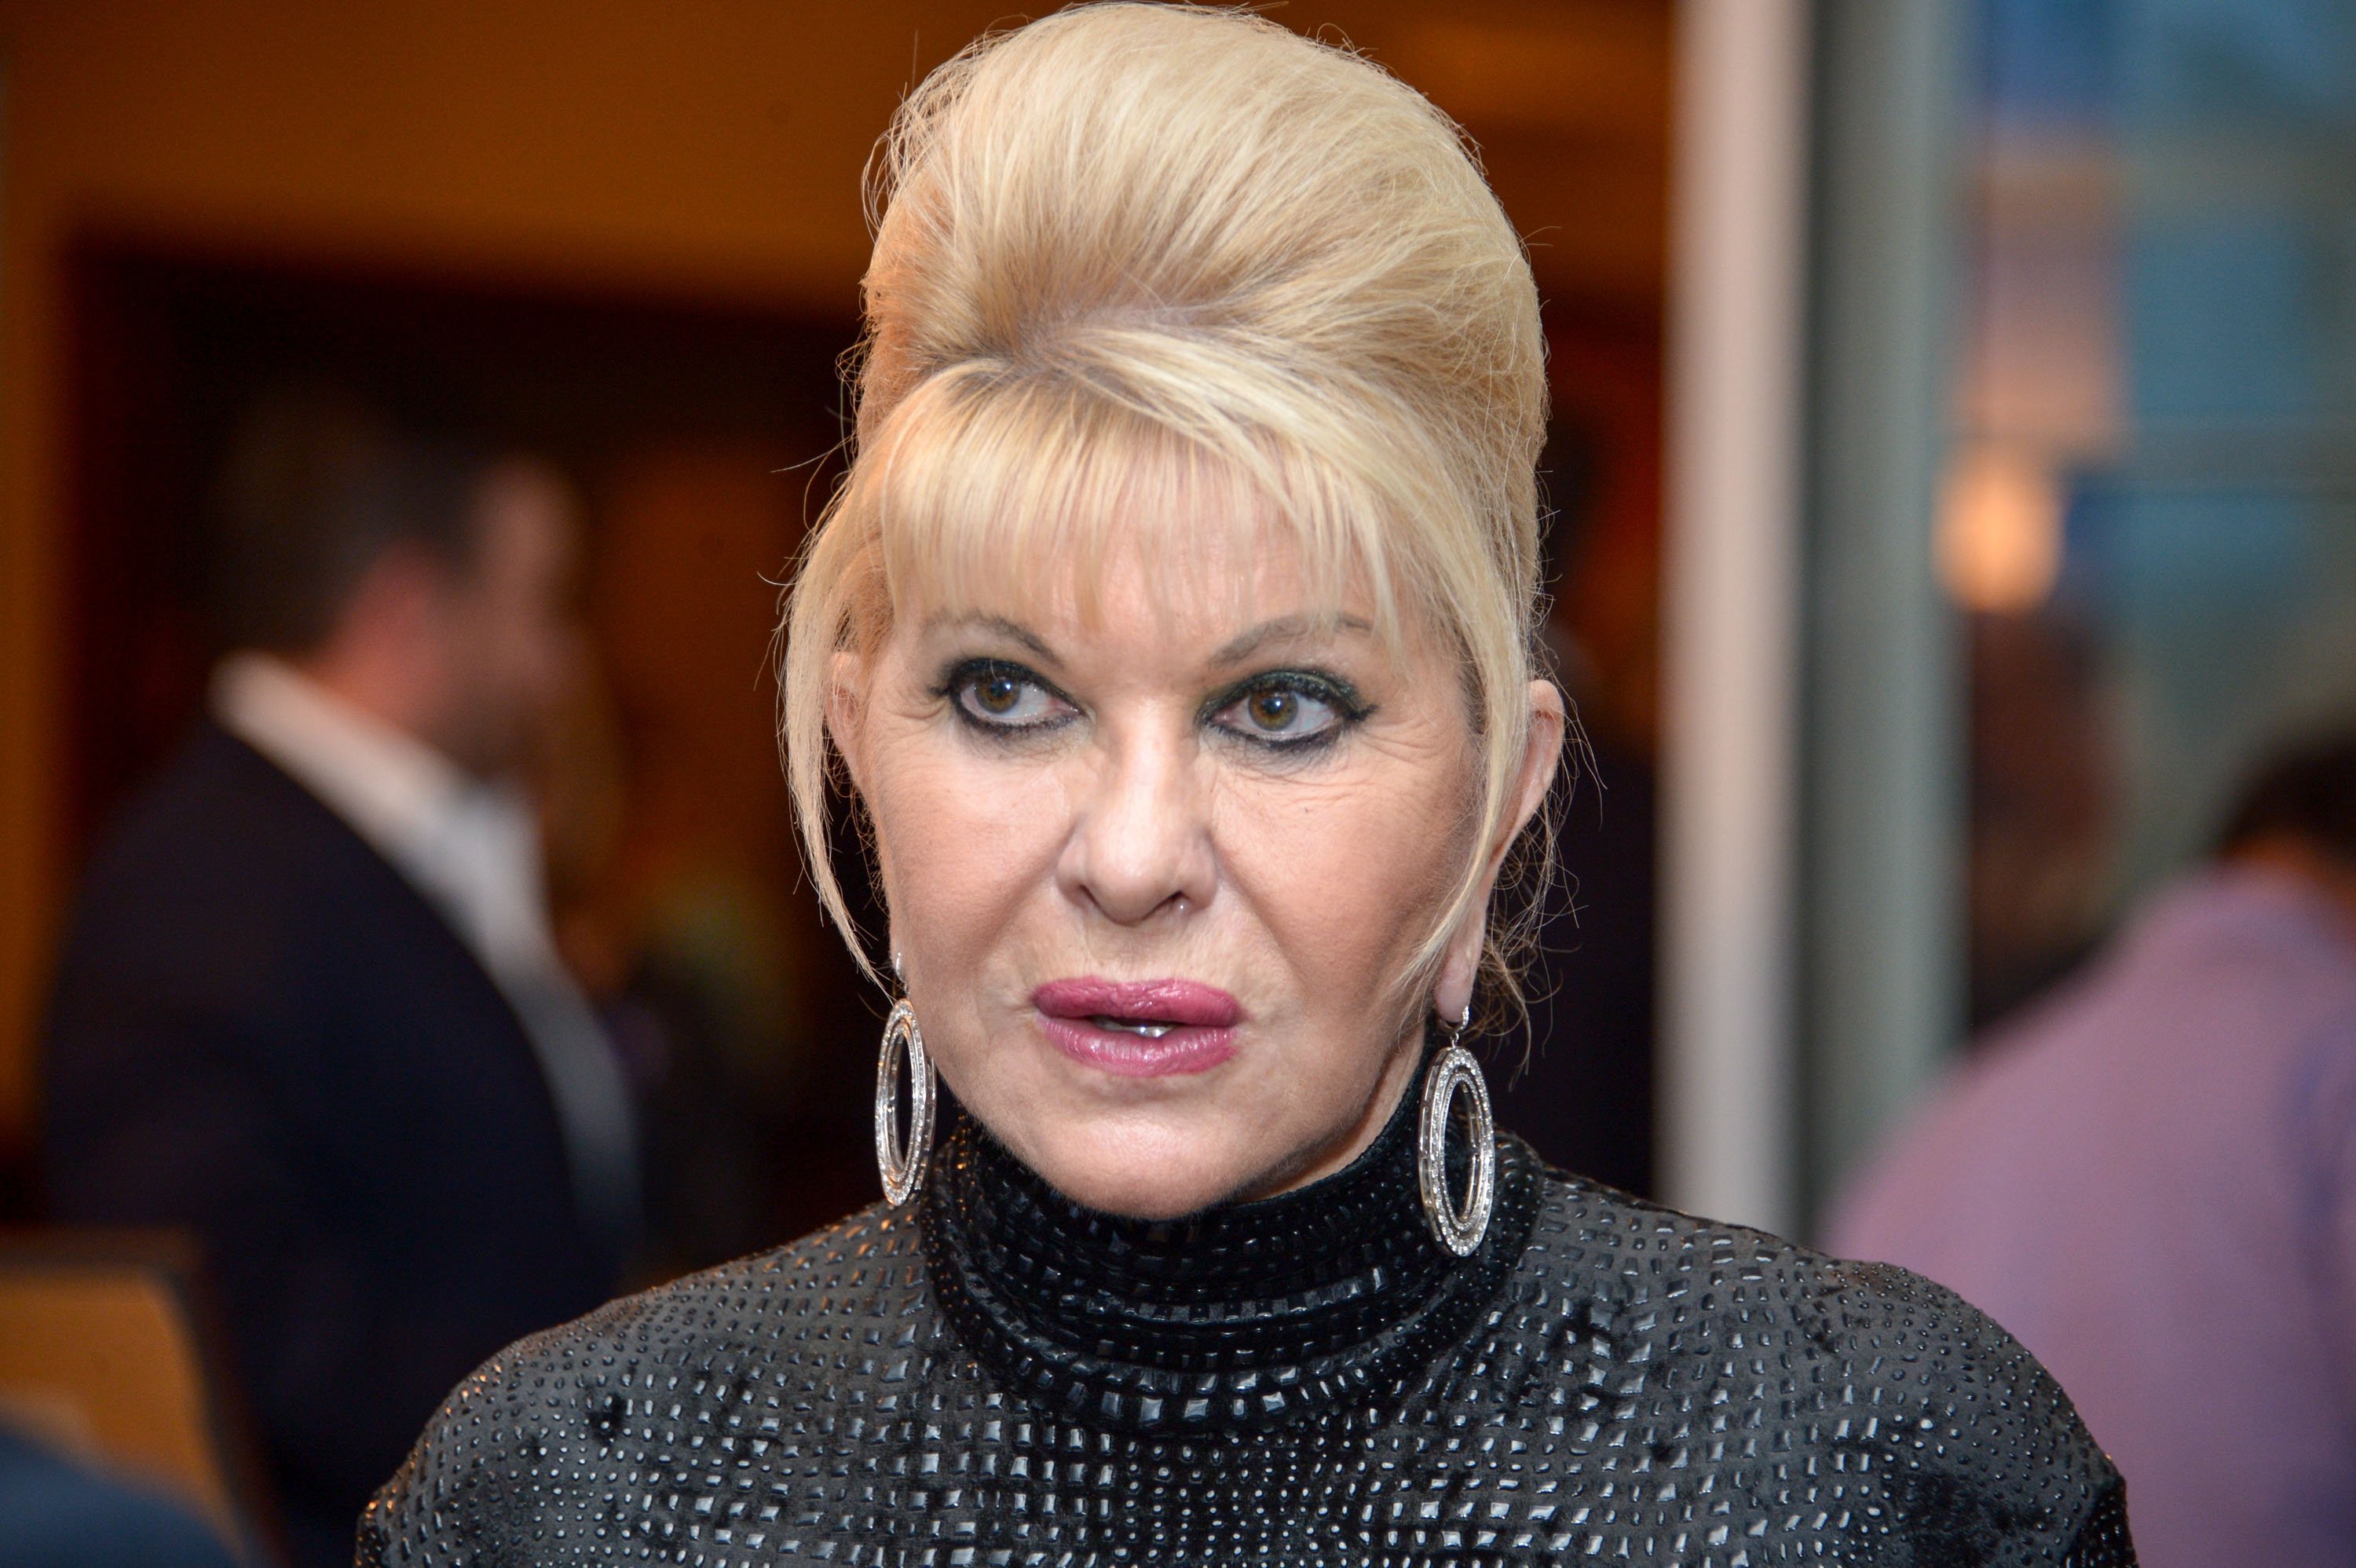 Ivana Trump attends the 9th Annual Eric Trump Foundation Golf Invitational Auction & Dinner at Trump National Golf Club Westchester on September 21, 2015 in Briarcliff Manor, New York. / Source: Getty Images